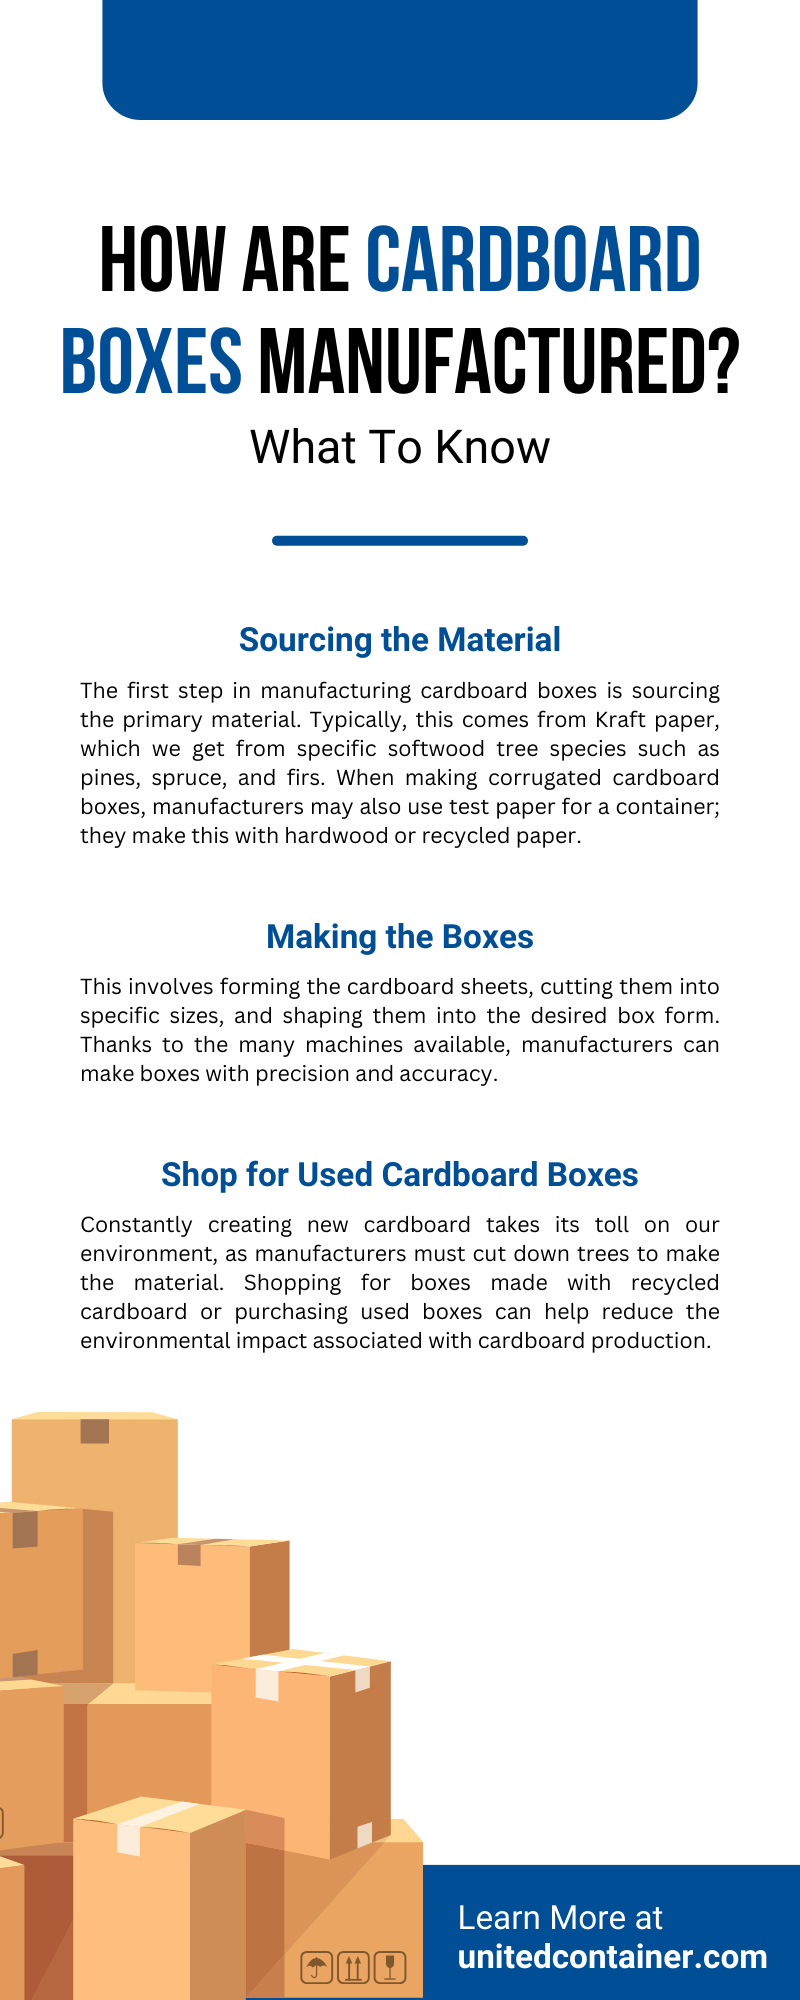 How Are Cardboard Boxes Manufactured? What To Know